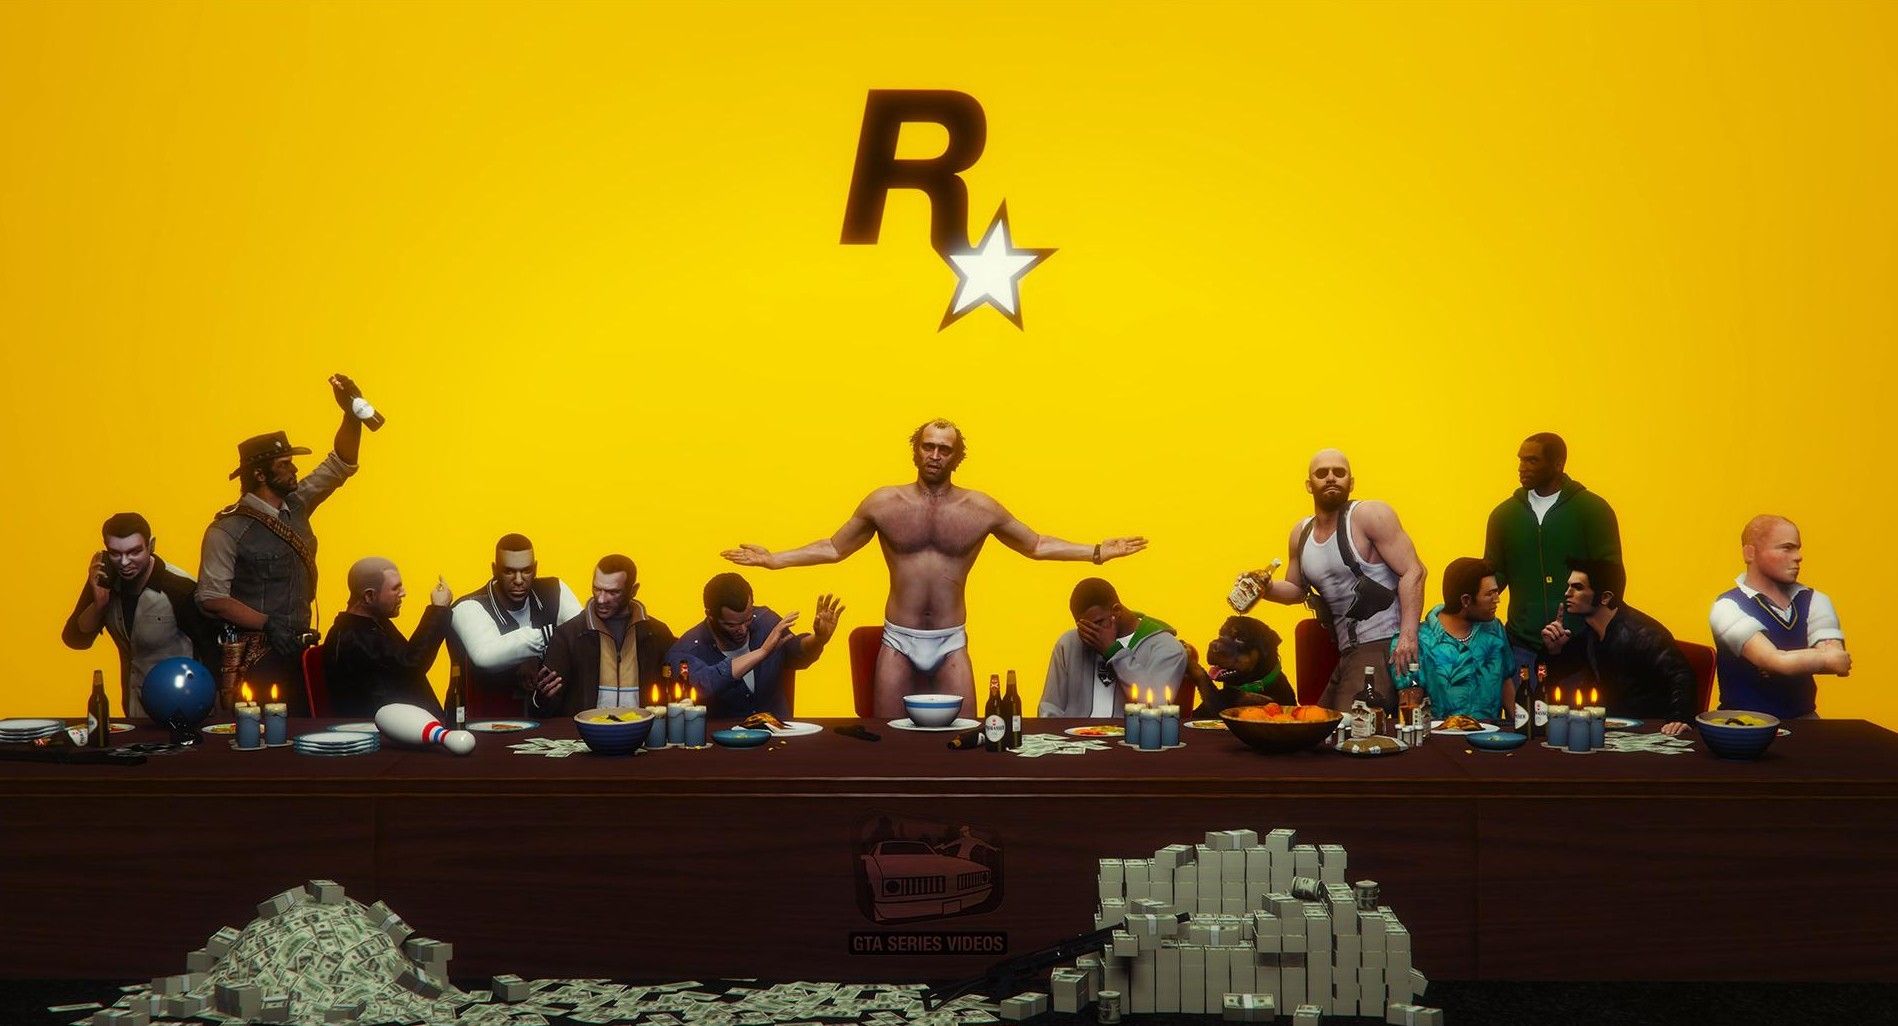 Rockstar purchases one of Starbreeze's Studios for $7.9million.